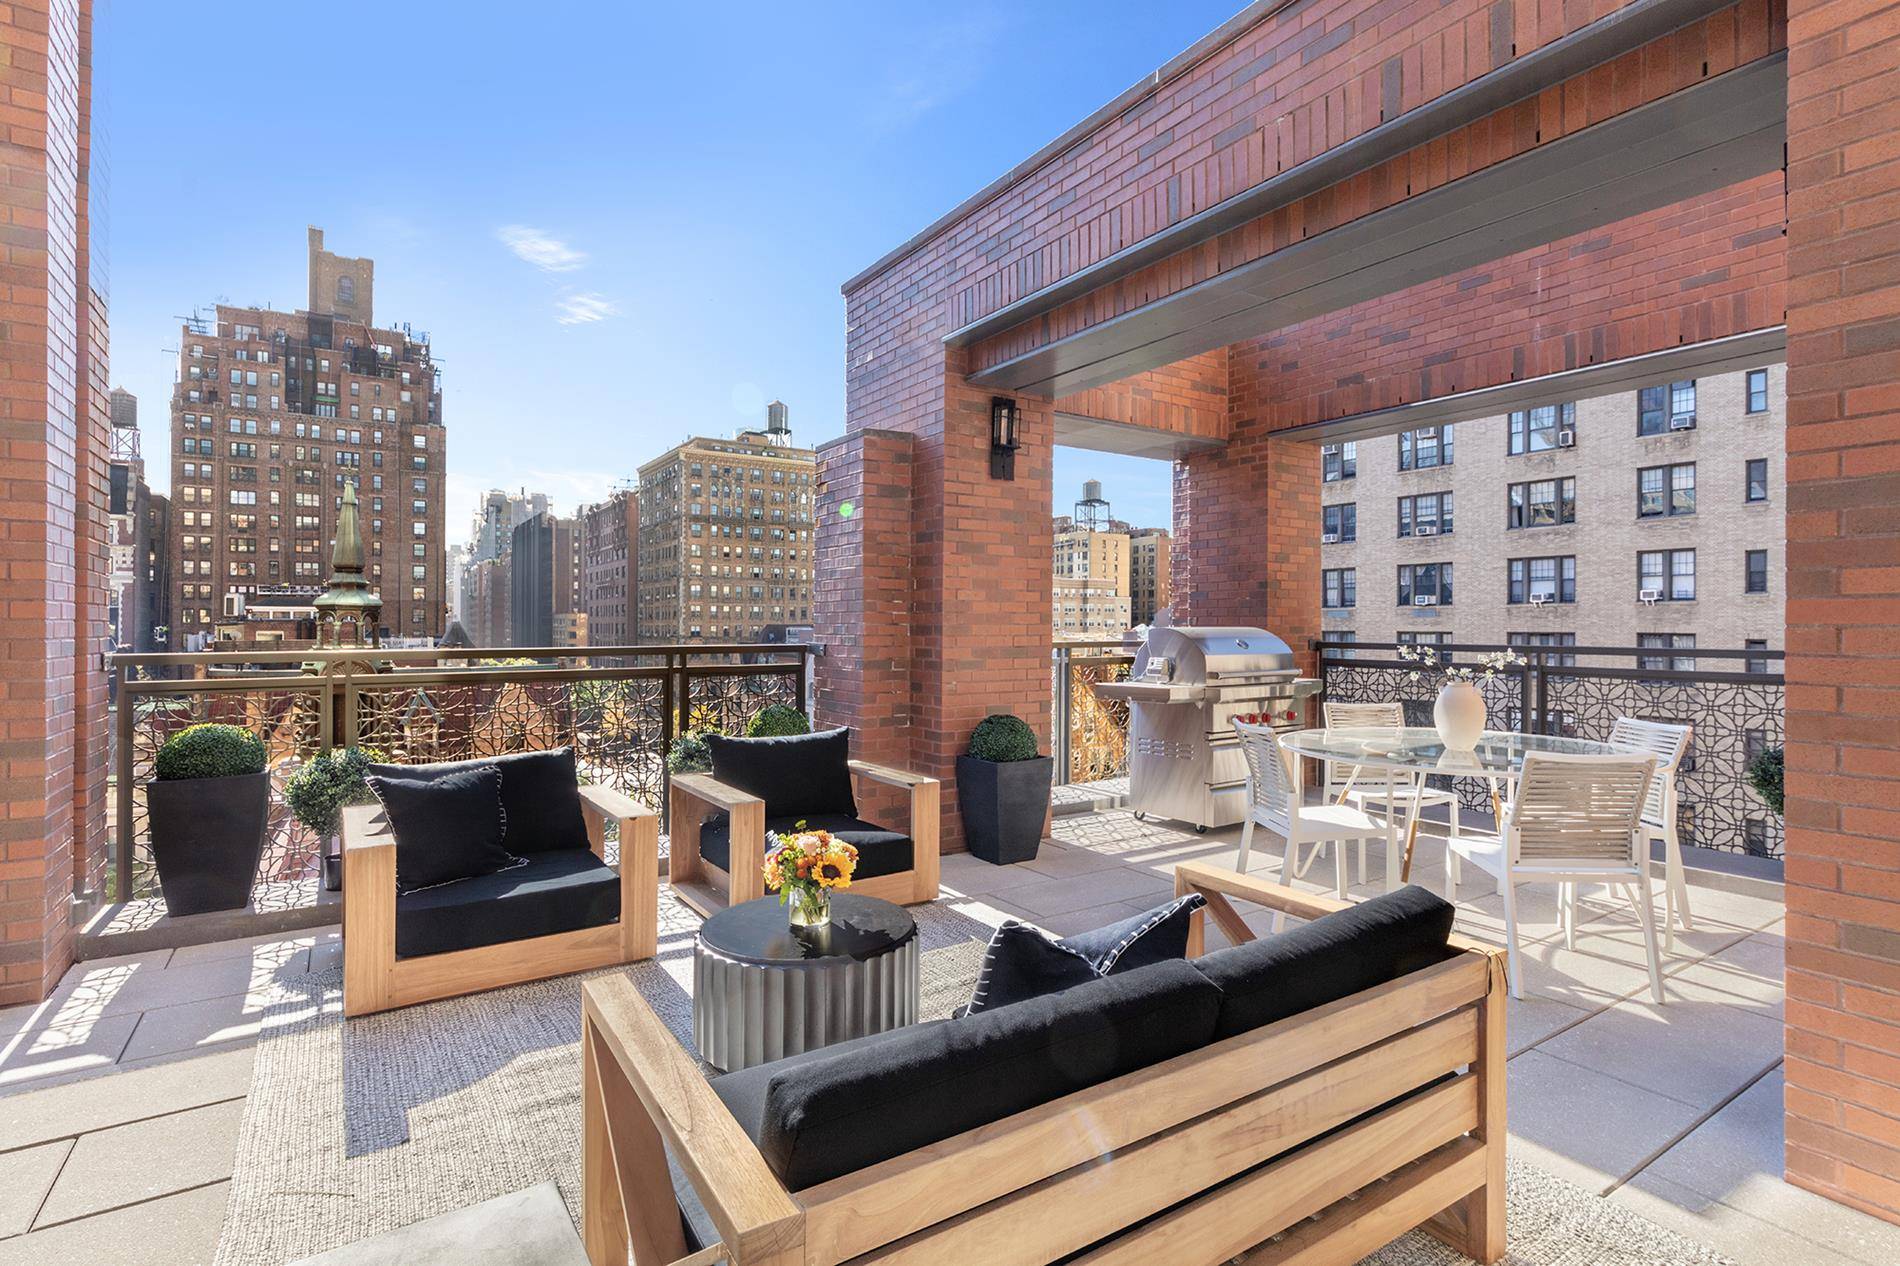 This NEW to Market CONDO has never been lived in and is located at the 378 WEA Condo on Manhattan s prime UWS.